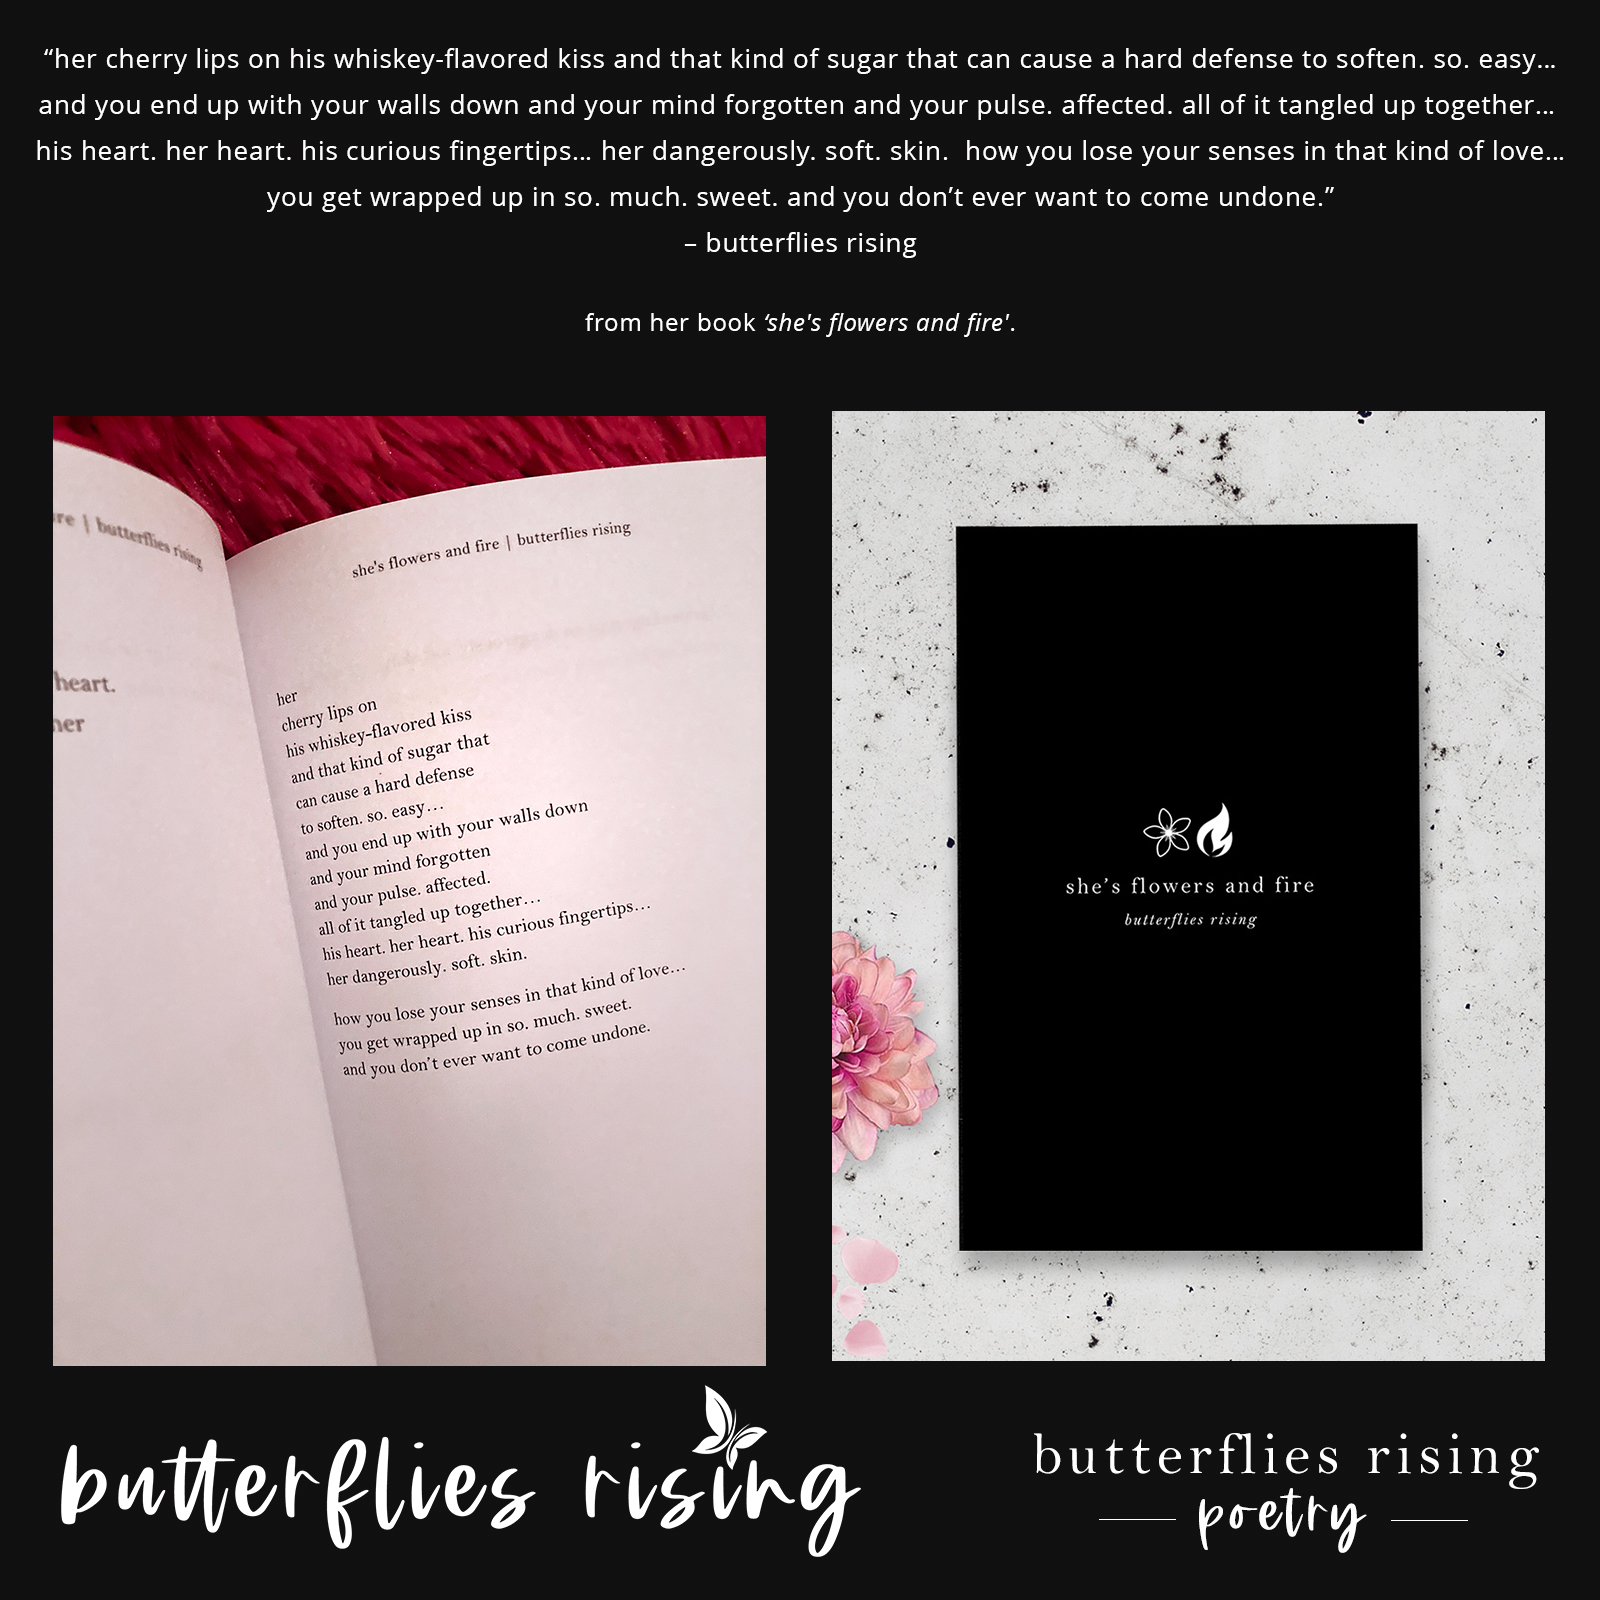 her cherry lips on his whiskey-flavored kiss and that kind of sugar that can cause a hard defense to soften. - butterflies rising